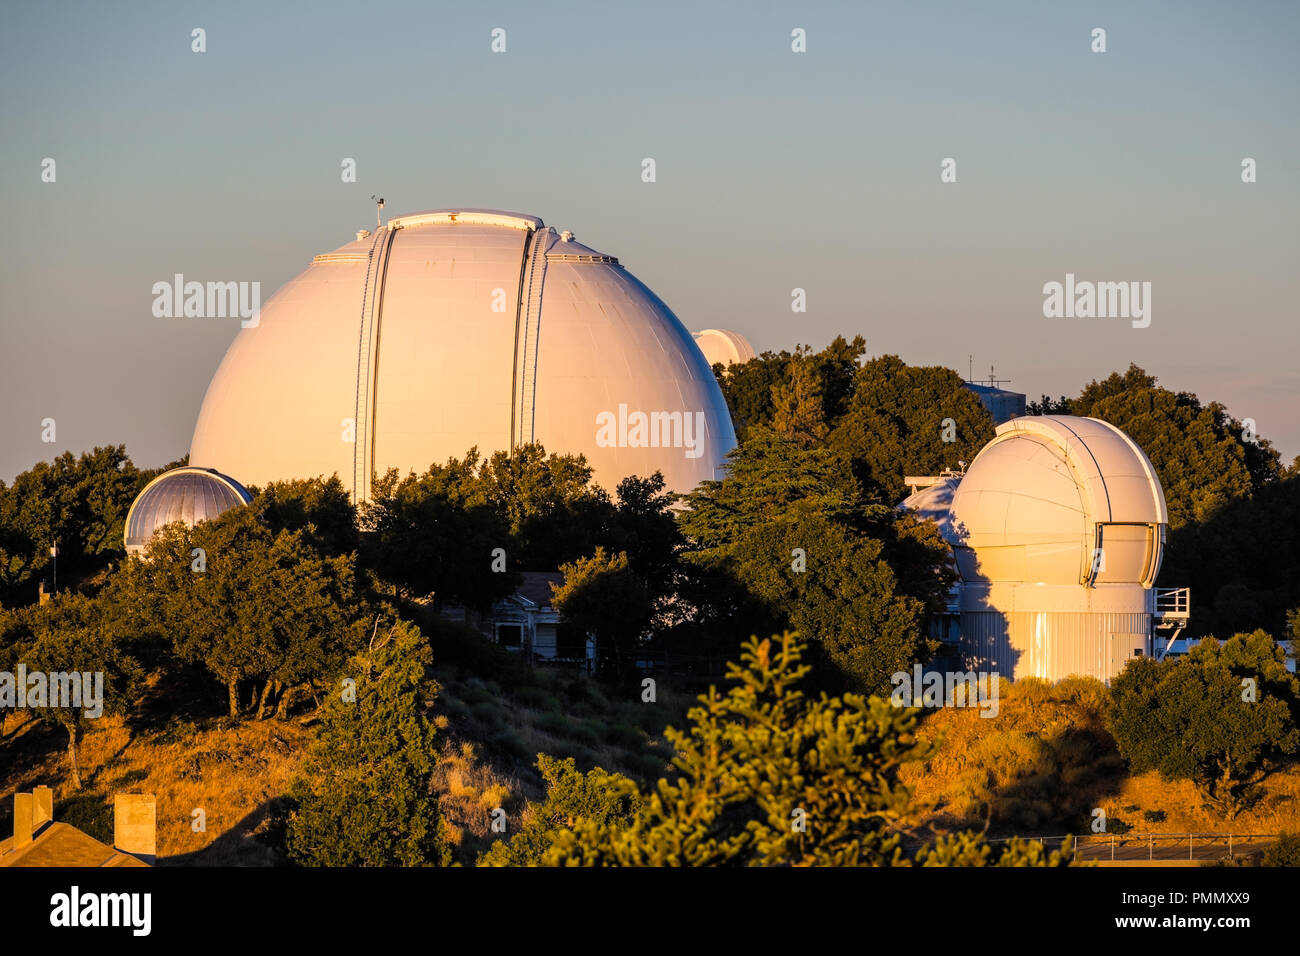 Sunset view towards Shane Observatory and the Automated Planet Finder telescope, Mt Hamilton, San Jose, San Francisco bay area, California Stock Photo